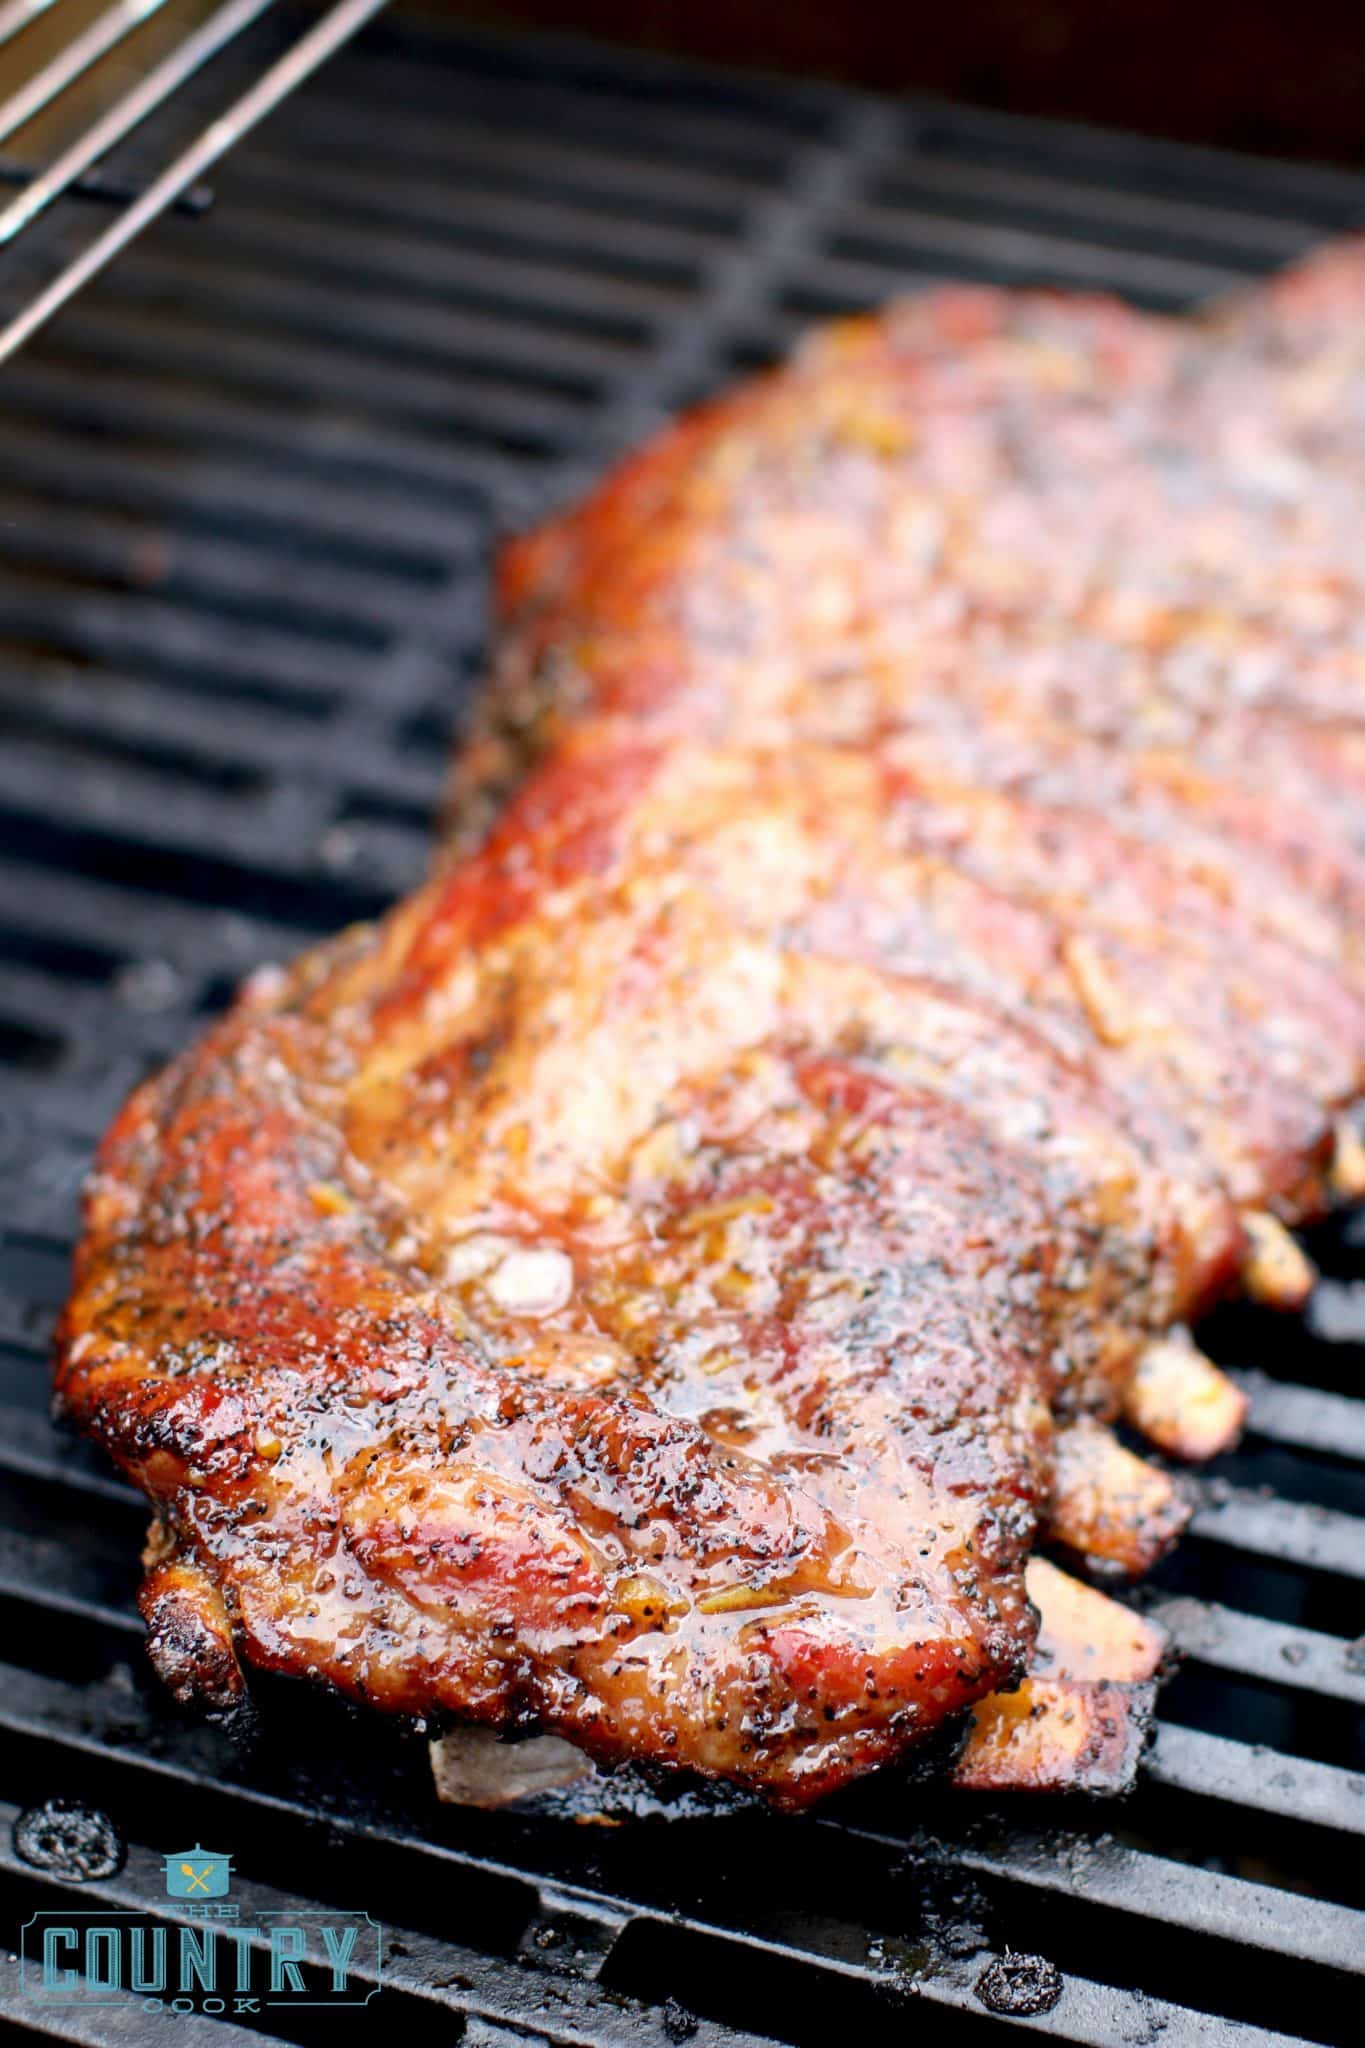 fully cooked pork ribs on a gas grill.